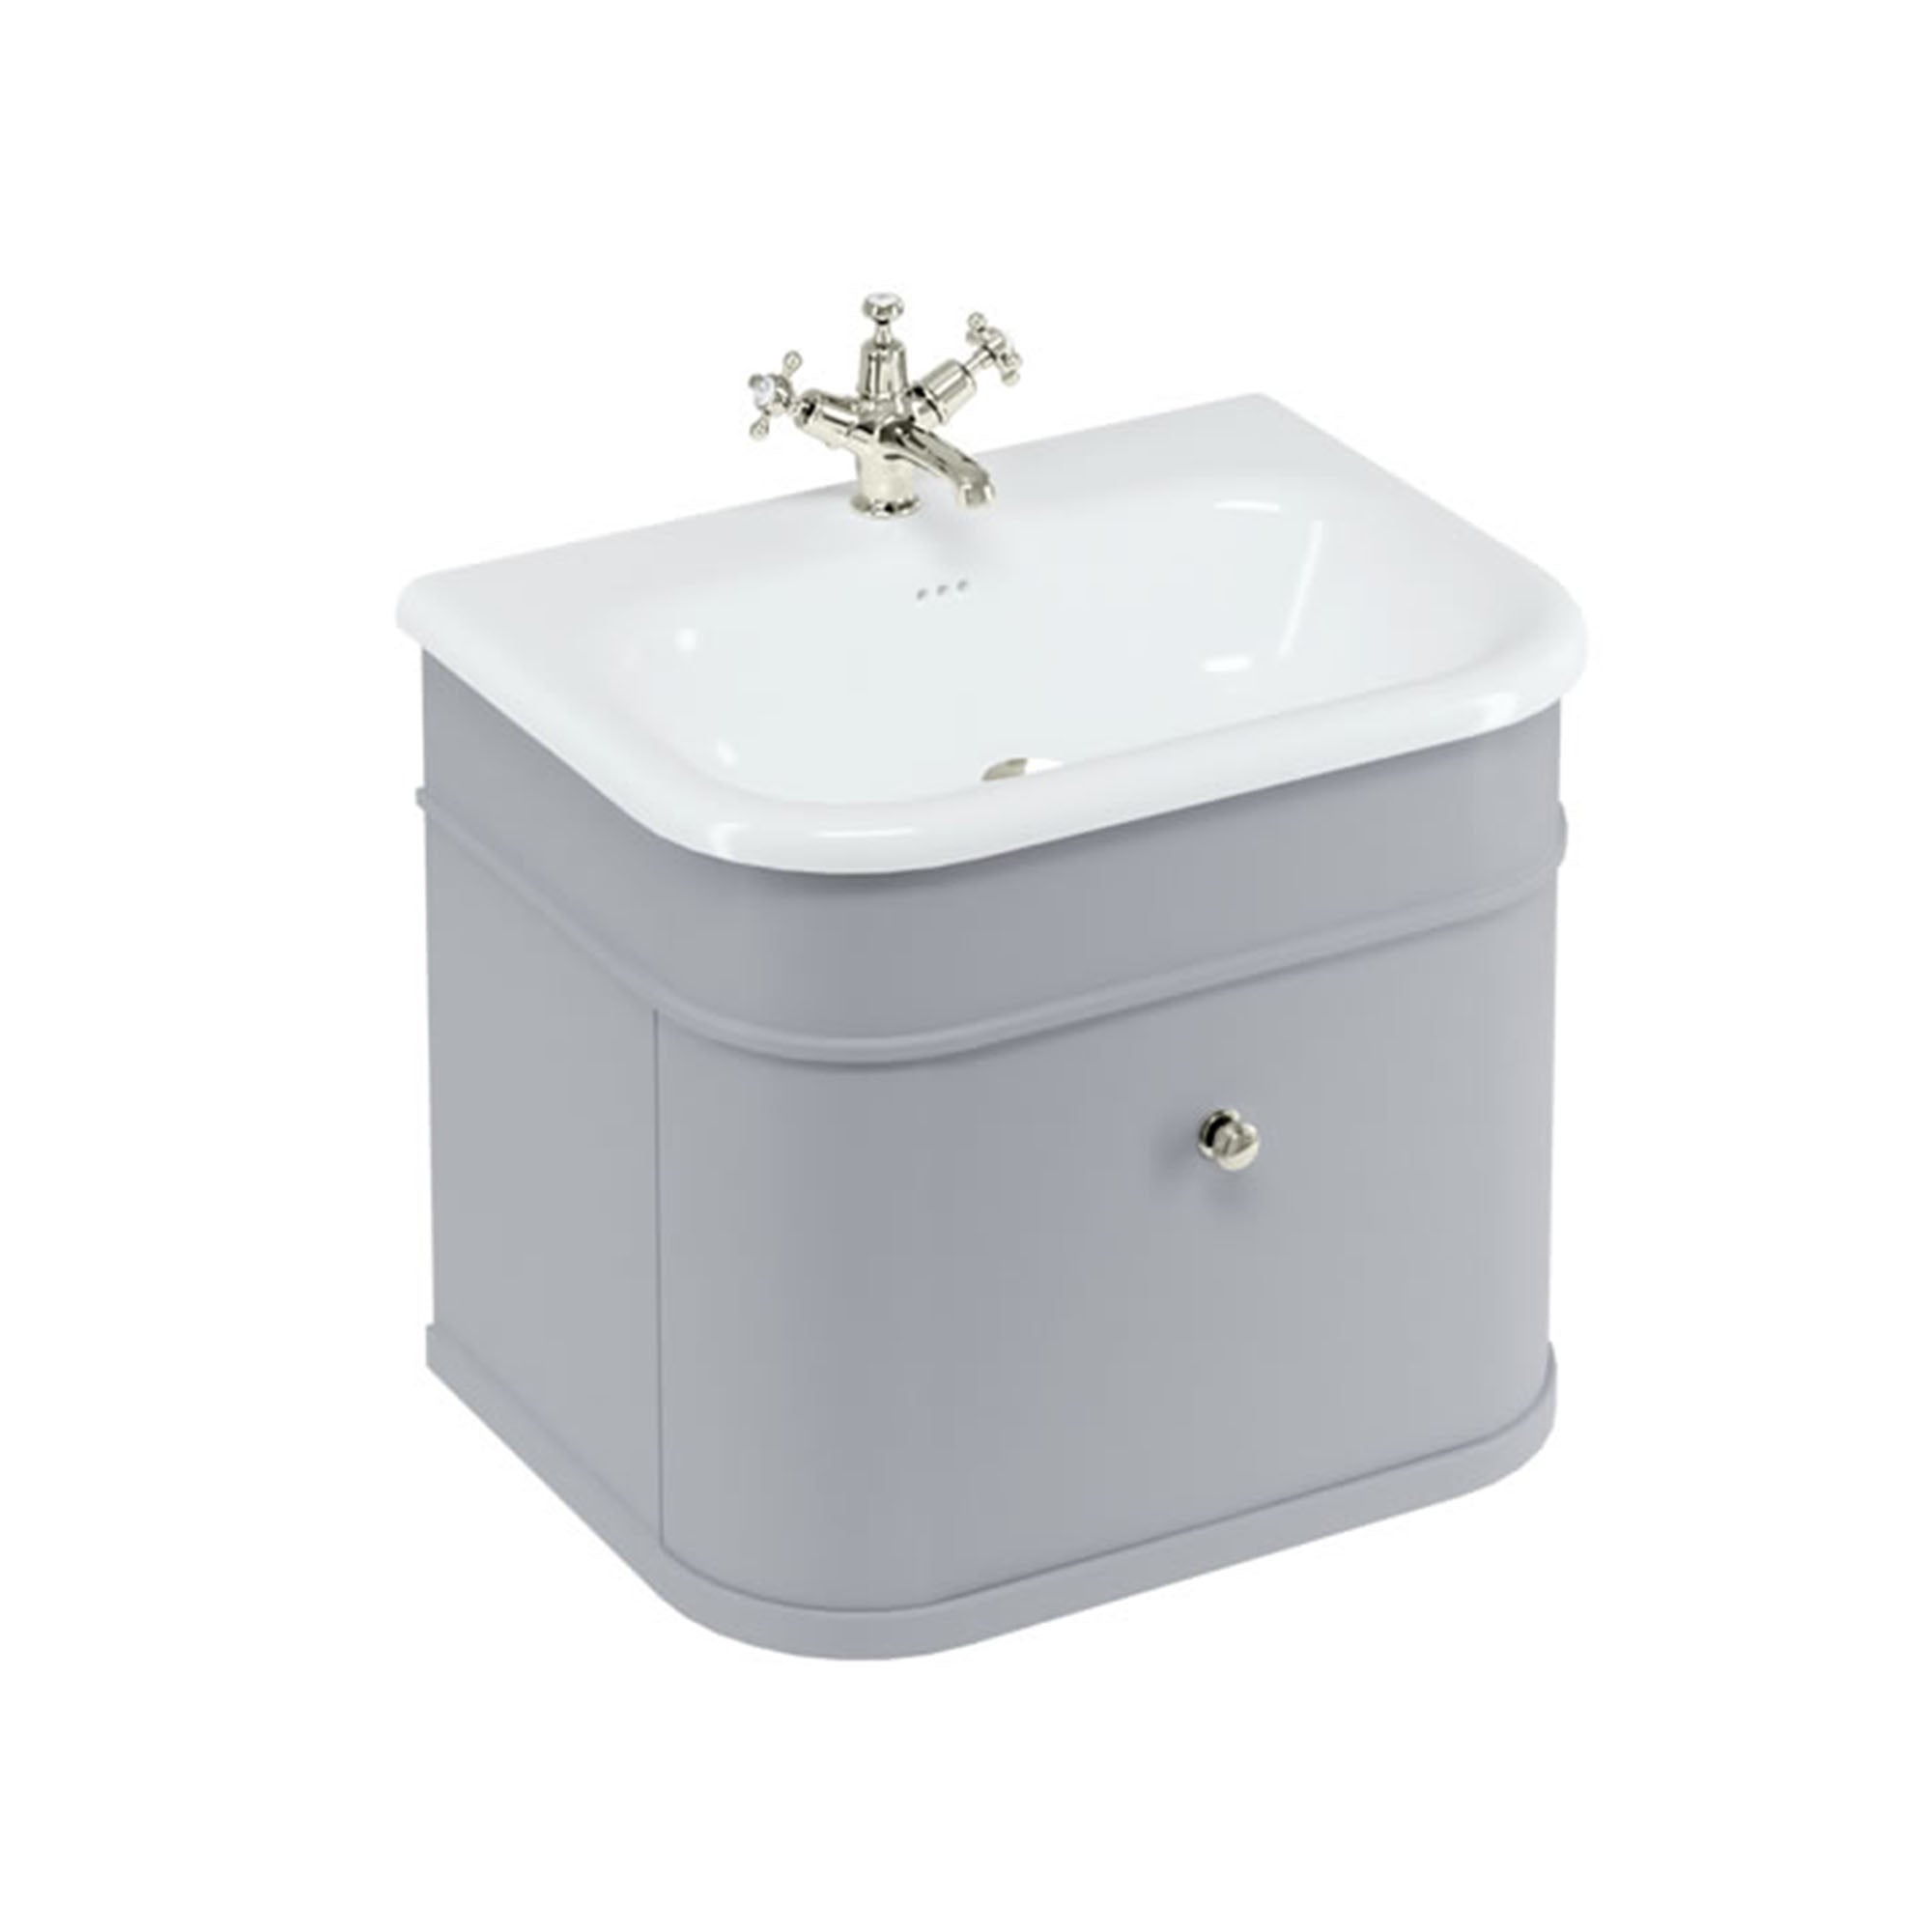 burlington chalfont 650mm wall mounted vanity with roll top basin classic grey